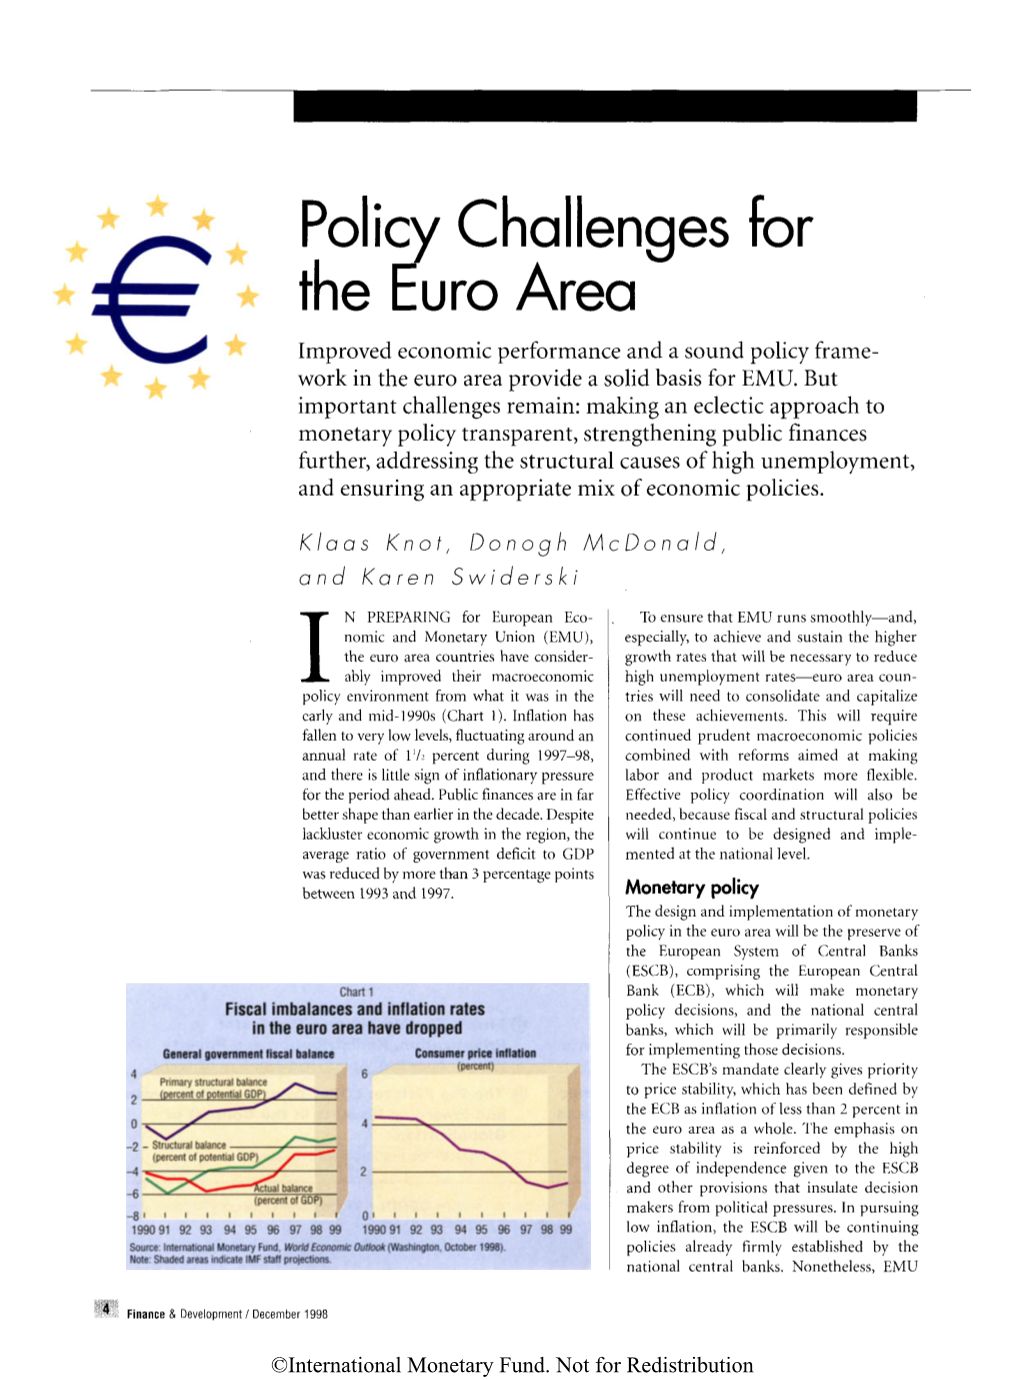 Policy Challenges for the Euro Area Improved Economic Performance and a Sound Policy Frame- Work in the Euro Area Provide a Solid Basis for EMU